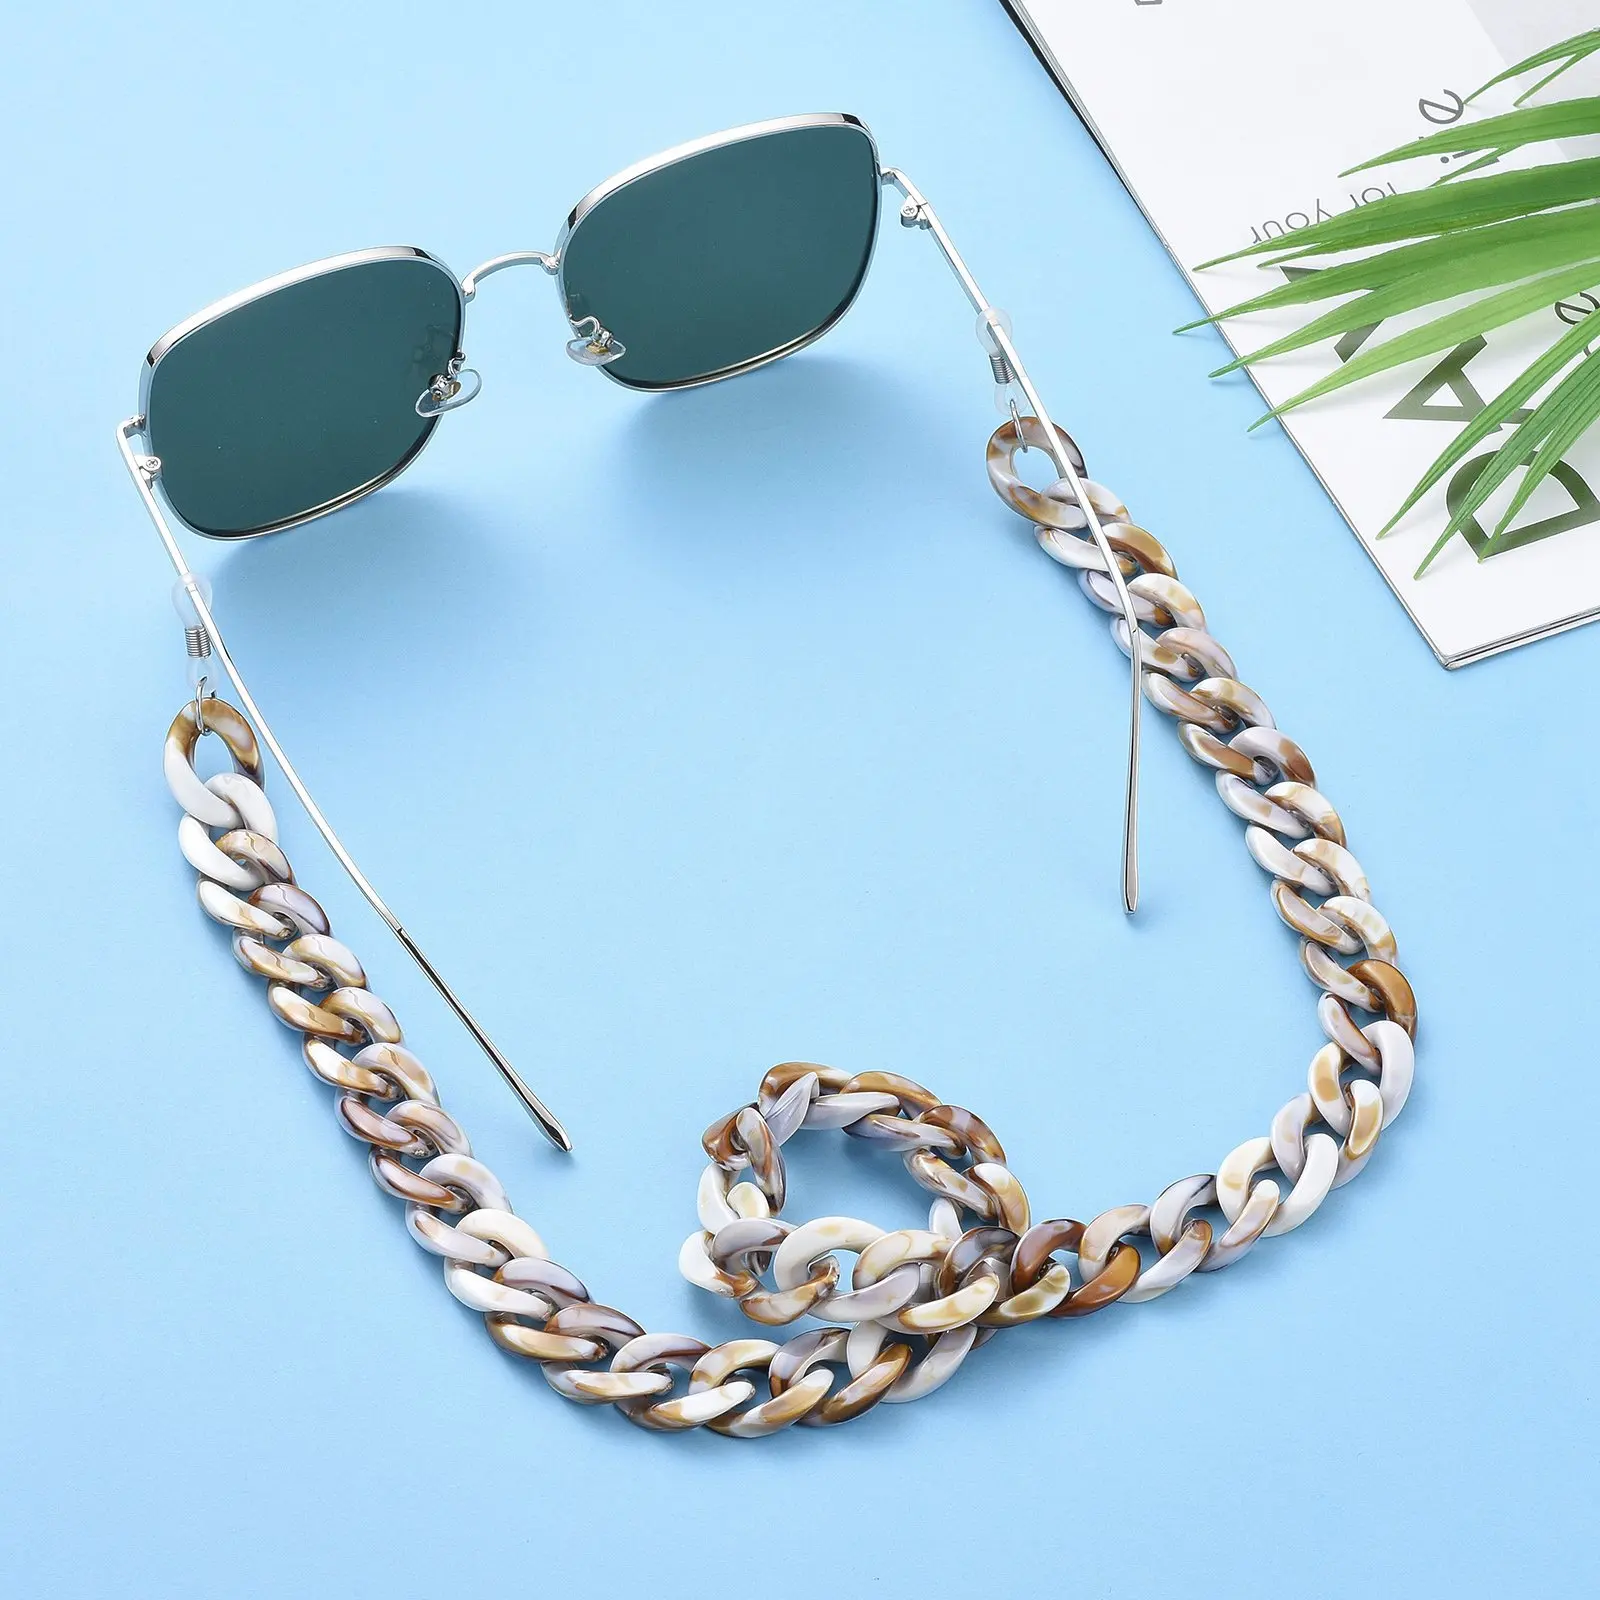 Meetee LCH-300 Acrylic Sunglasses Chain Anti-skid Eyeglass Plastic Neck Hanging Strap Cord Glasses Chains